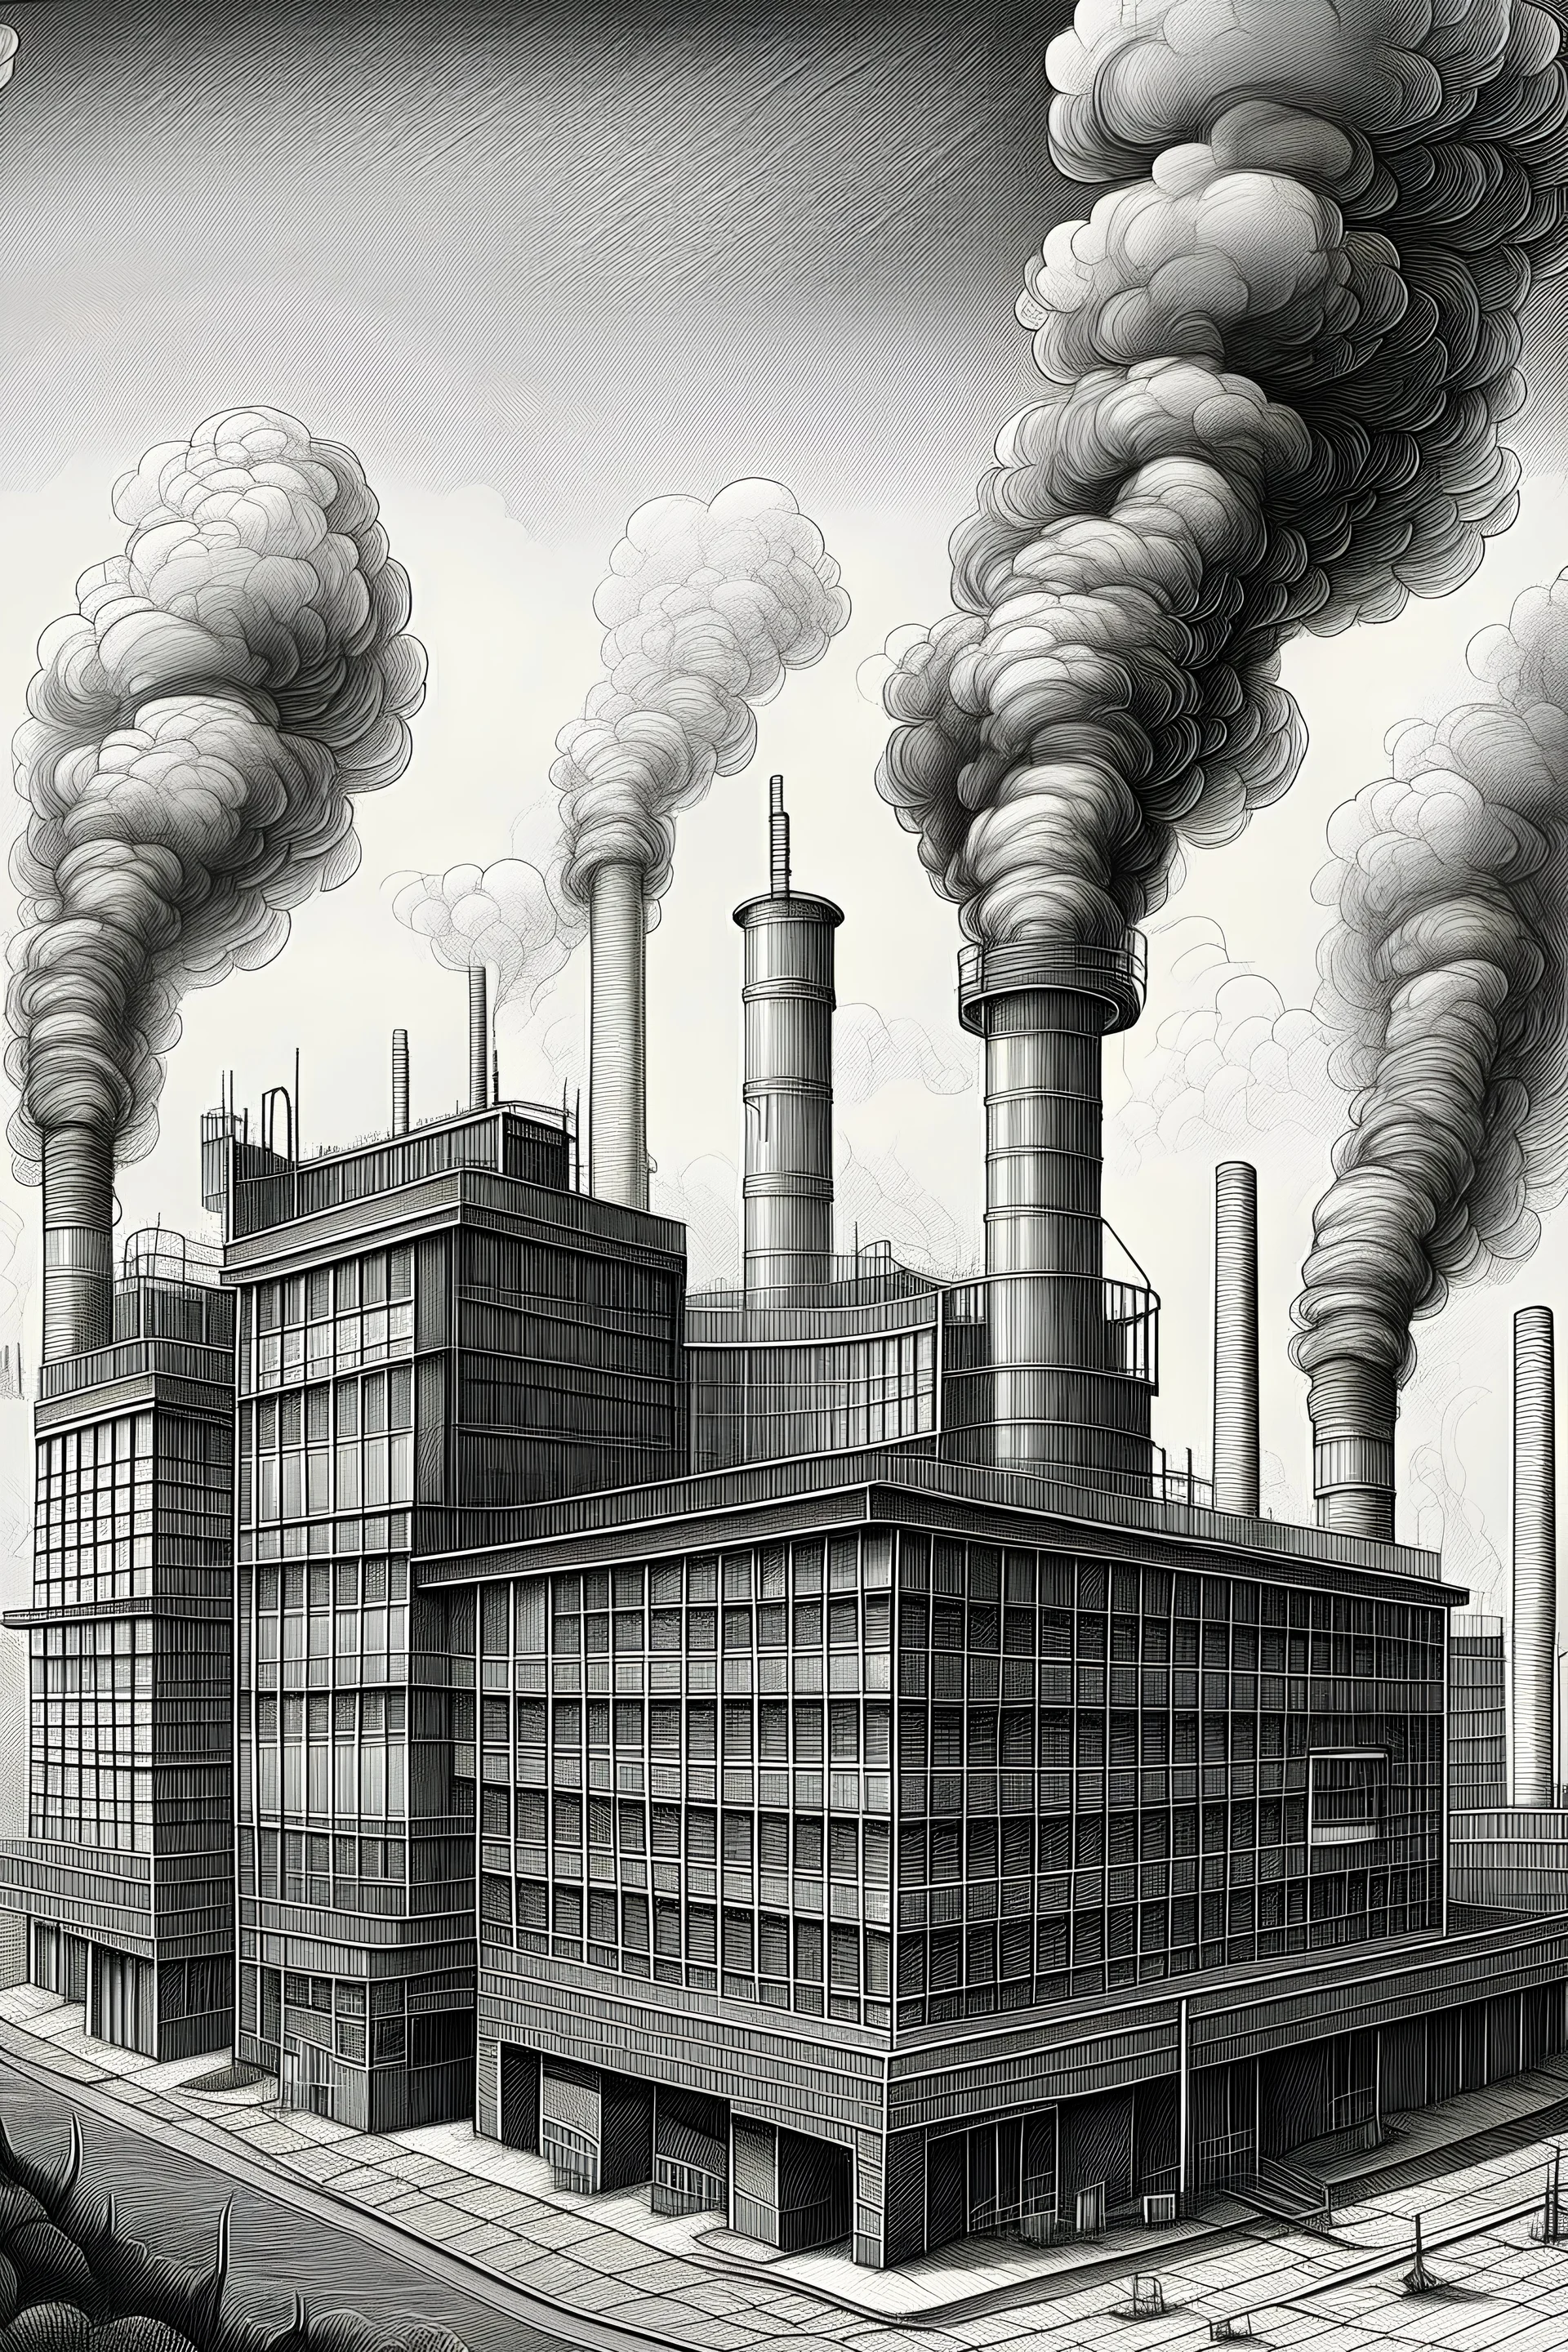 INDUSTRIAL POLLUTION | Entry | THE WORK